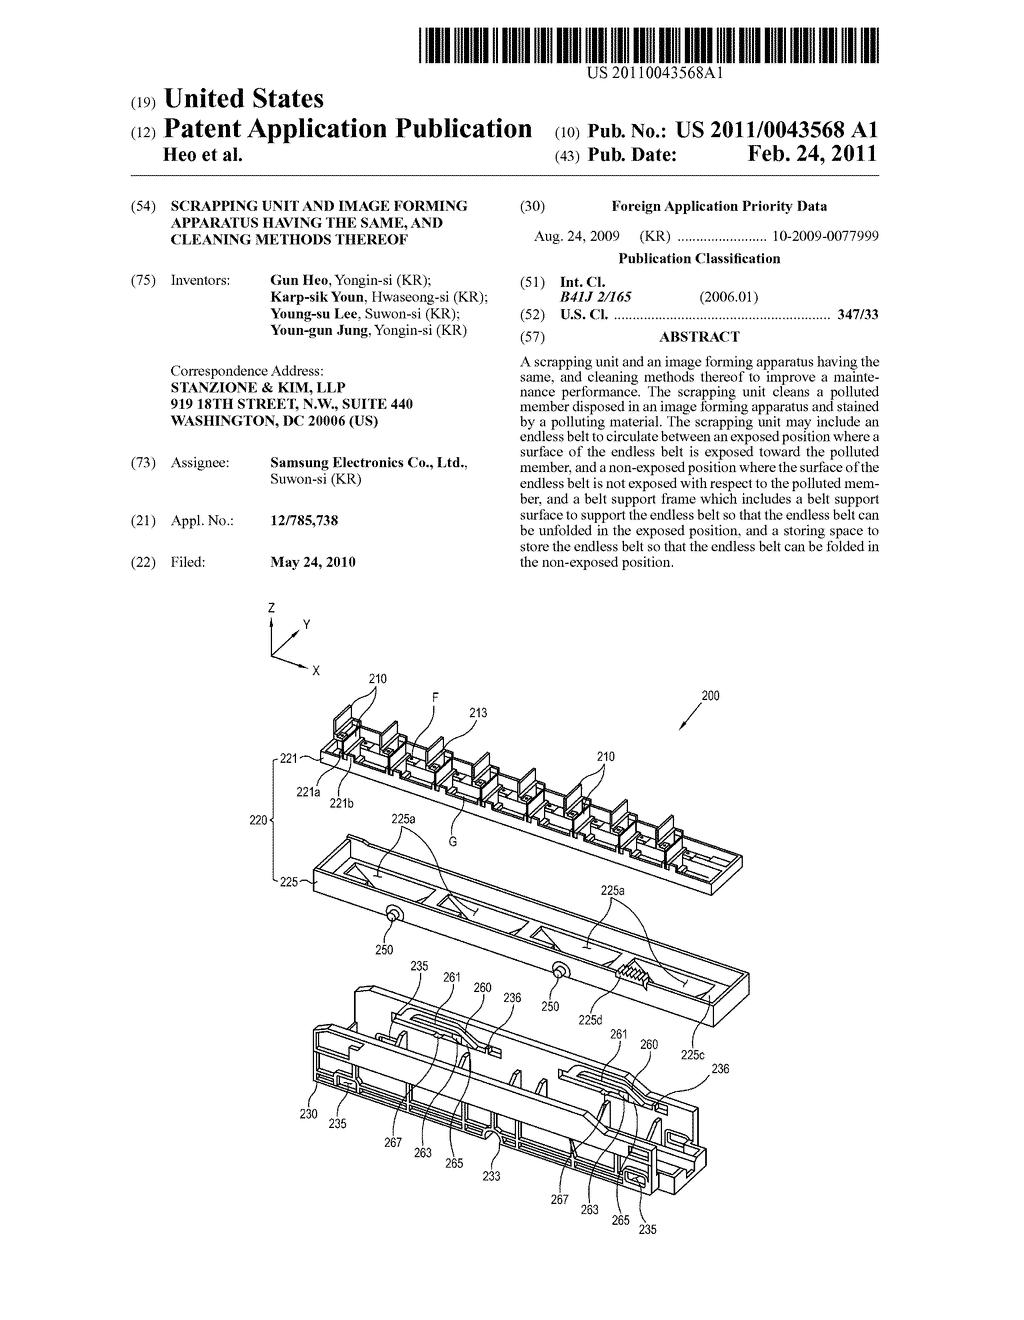 SCRAPPING UNIT AND IMAGE FORMING APPARATUS HAVING THE SAME, AND CLEANING METHODS THEREOF - diagram, schematic, and image 01